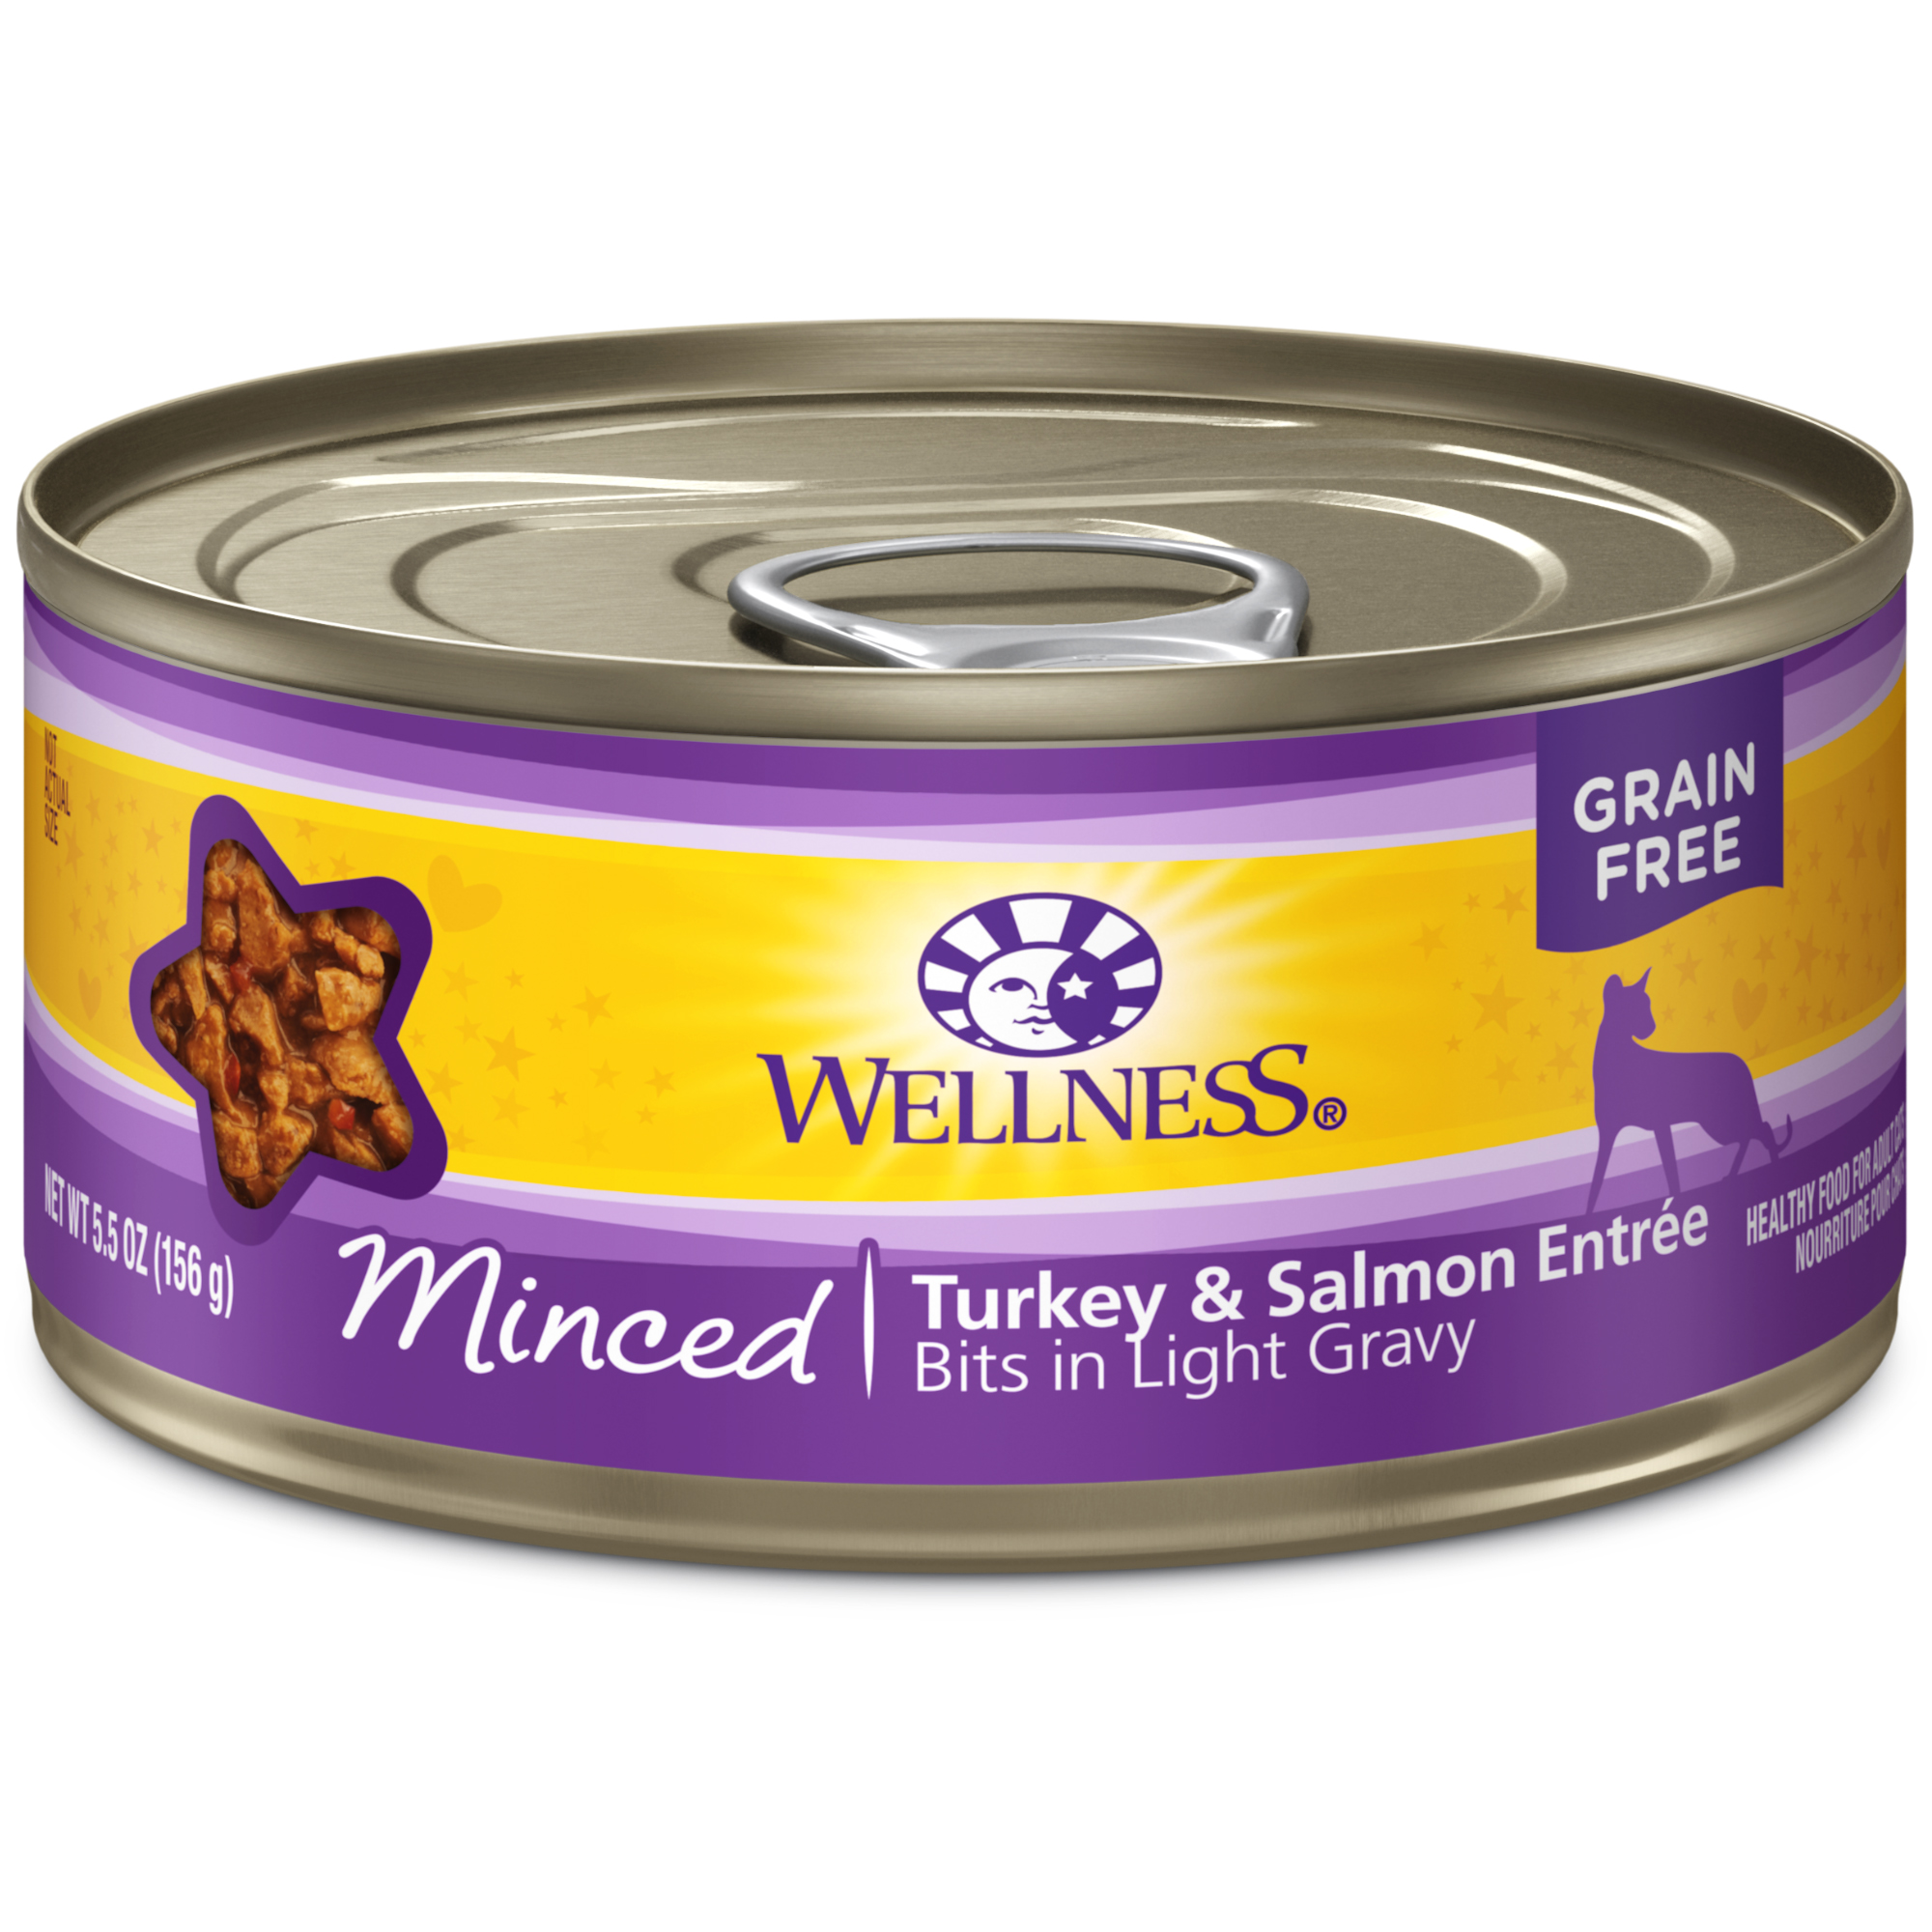 Wellness Complete Health Natural Grain Free Wet Canned Cat Food, Minced Turkey & Salmon Entree, 5.5-Ounce Can (Pack of 24) - image 1 of 8